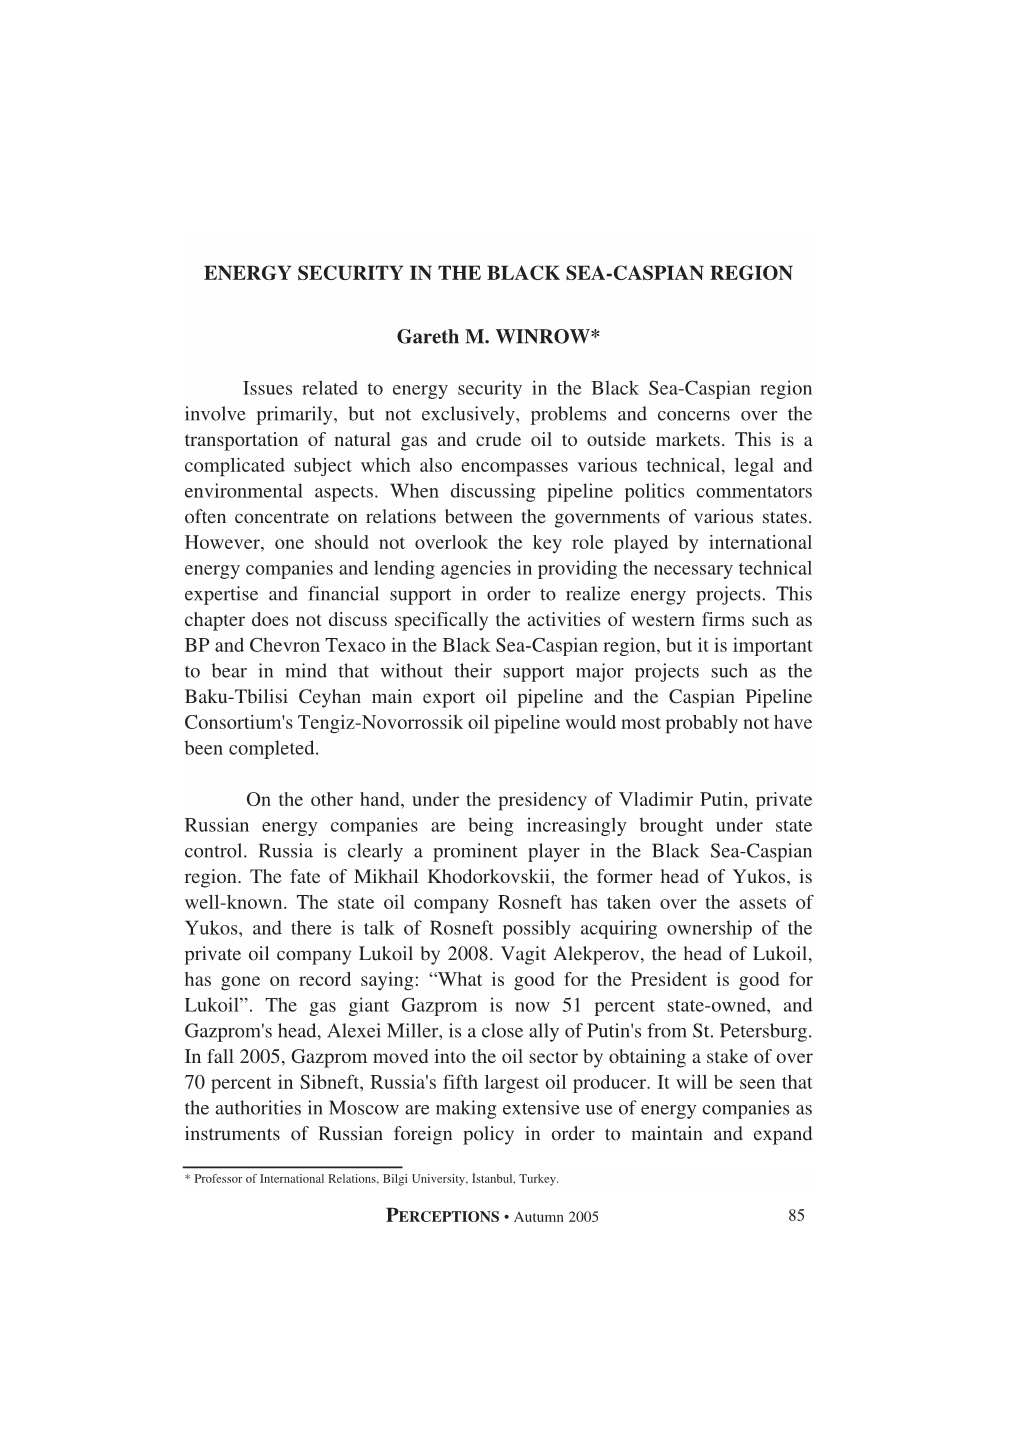 ENERGY SECURITY in the BLACK SEA-CASPIAN REGION Gareth M. WINROW* Issues Related to Energy Security in the Black Sea-Caspian